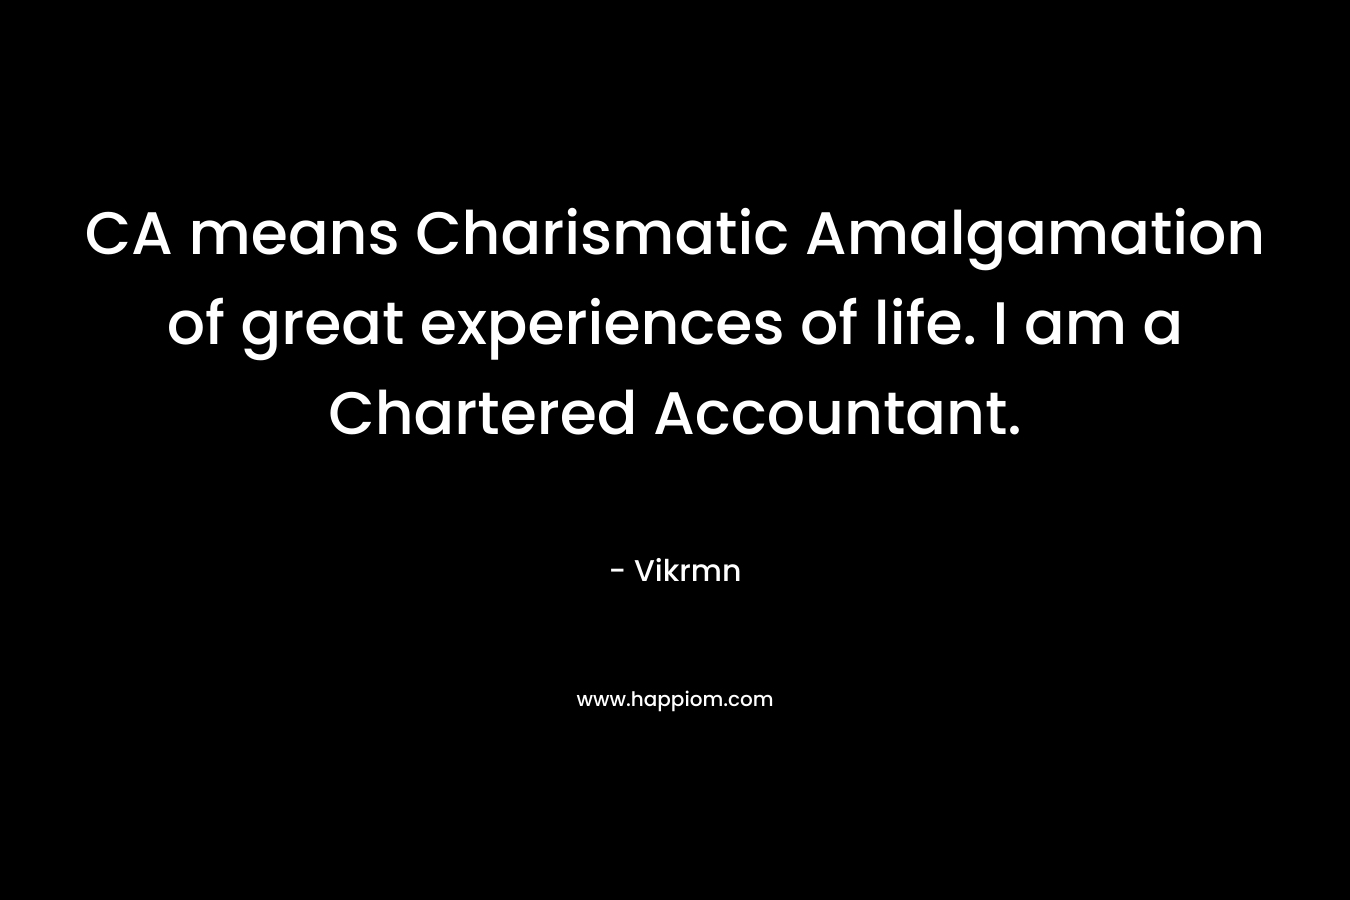 CA means Charismatic Amalgamation of great experiences of life. I am a Chartered Accountant. – Vikrmn